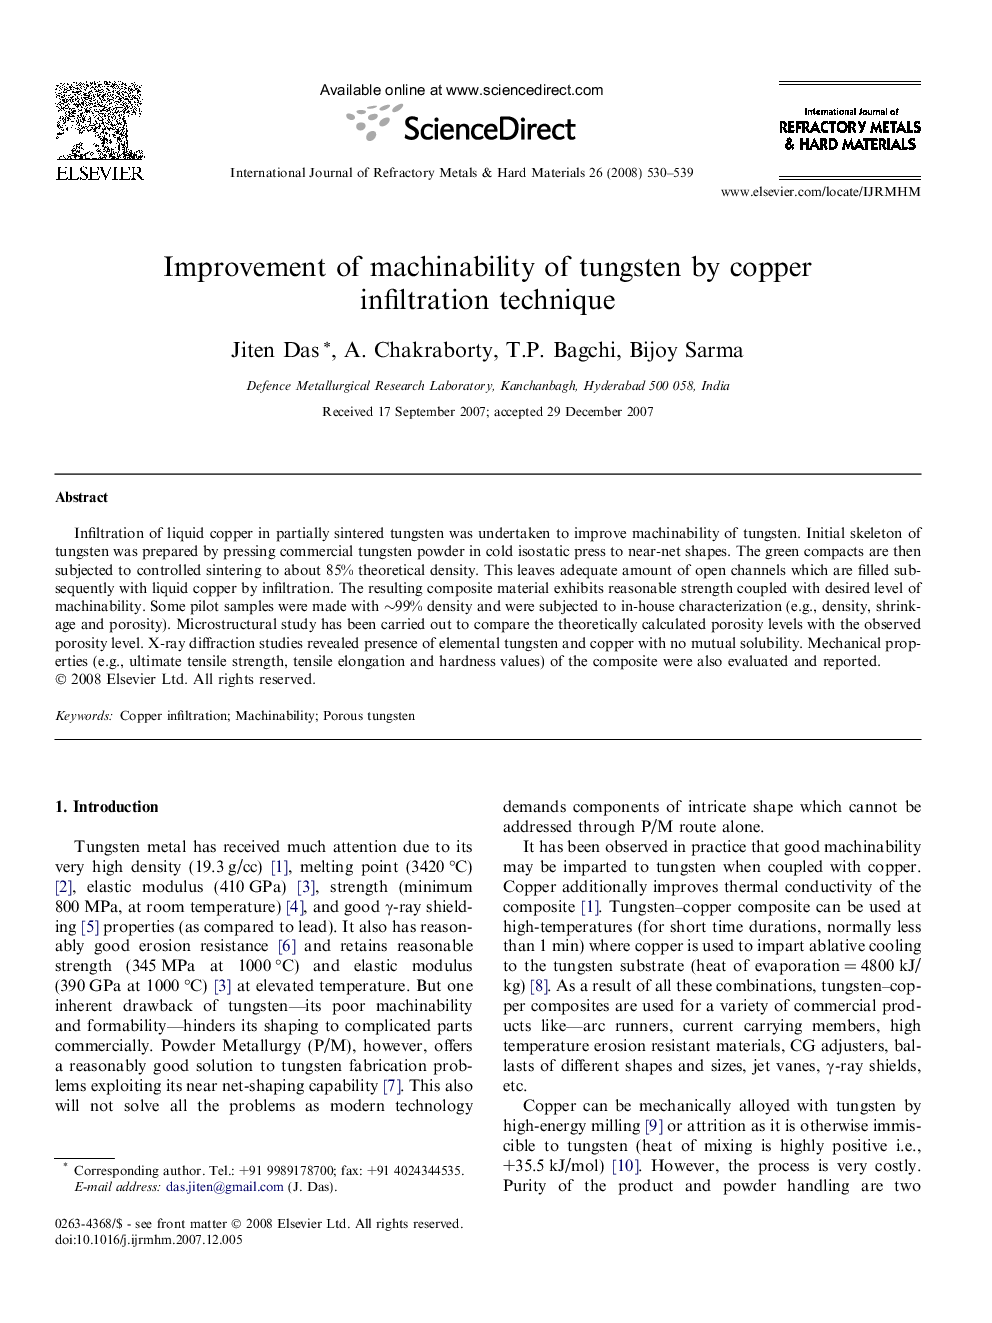 Improvement of machinability of tungsten by copper infiltration technique